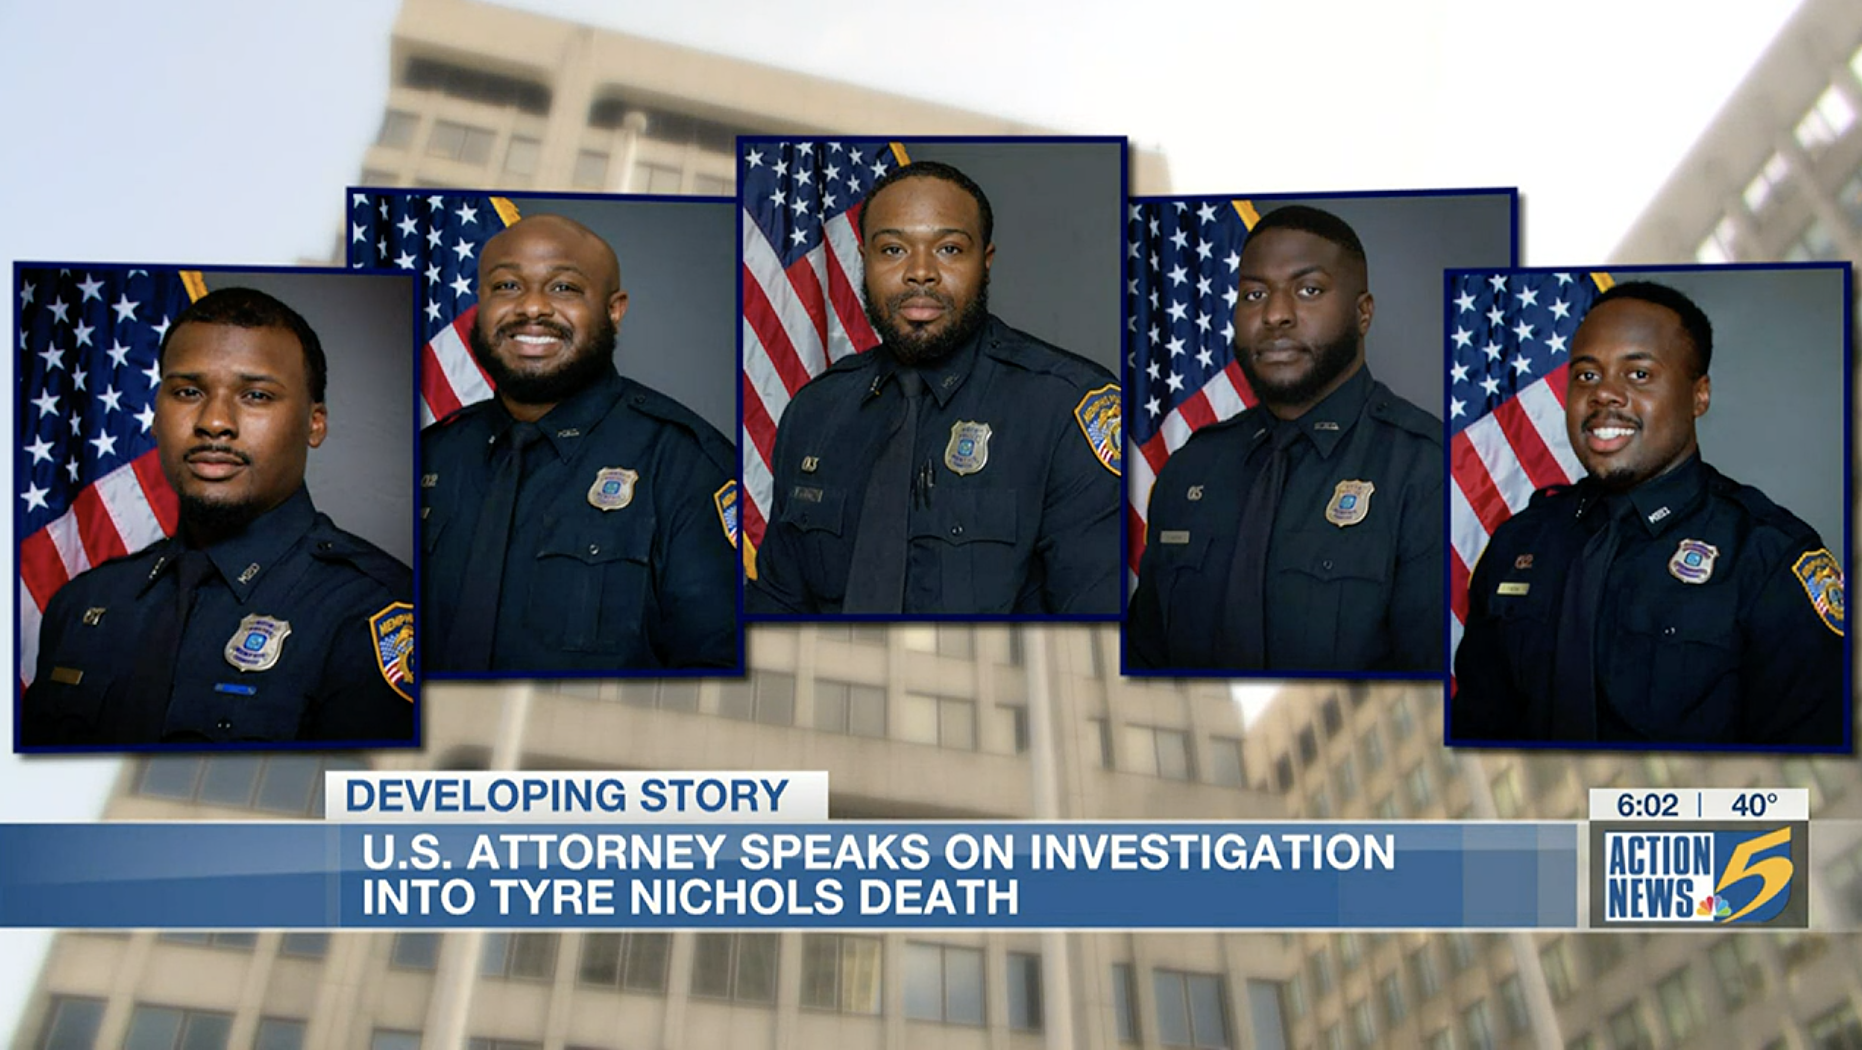 NYPD Preparing For Potential Protests In Response To Anticipated Body Cam Footage Release Involving Memphis PD That Preceded Tyre Nichols’ Death.